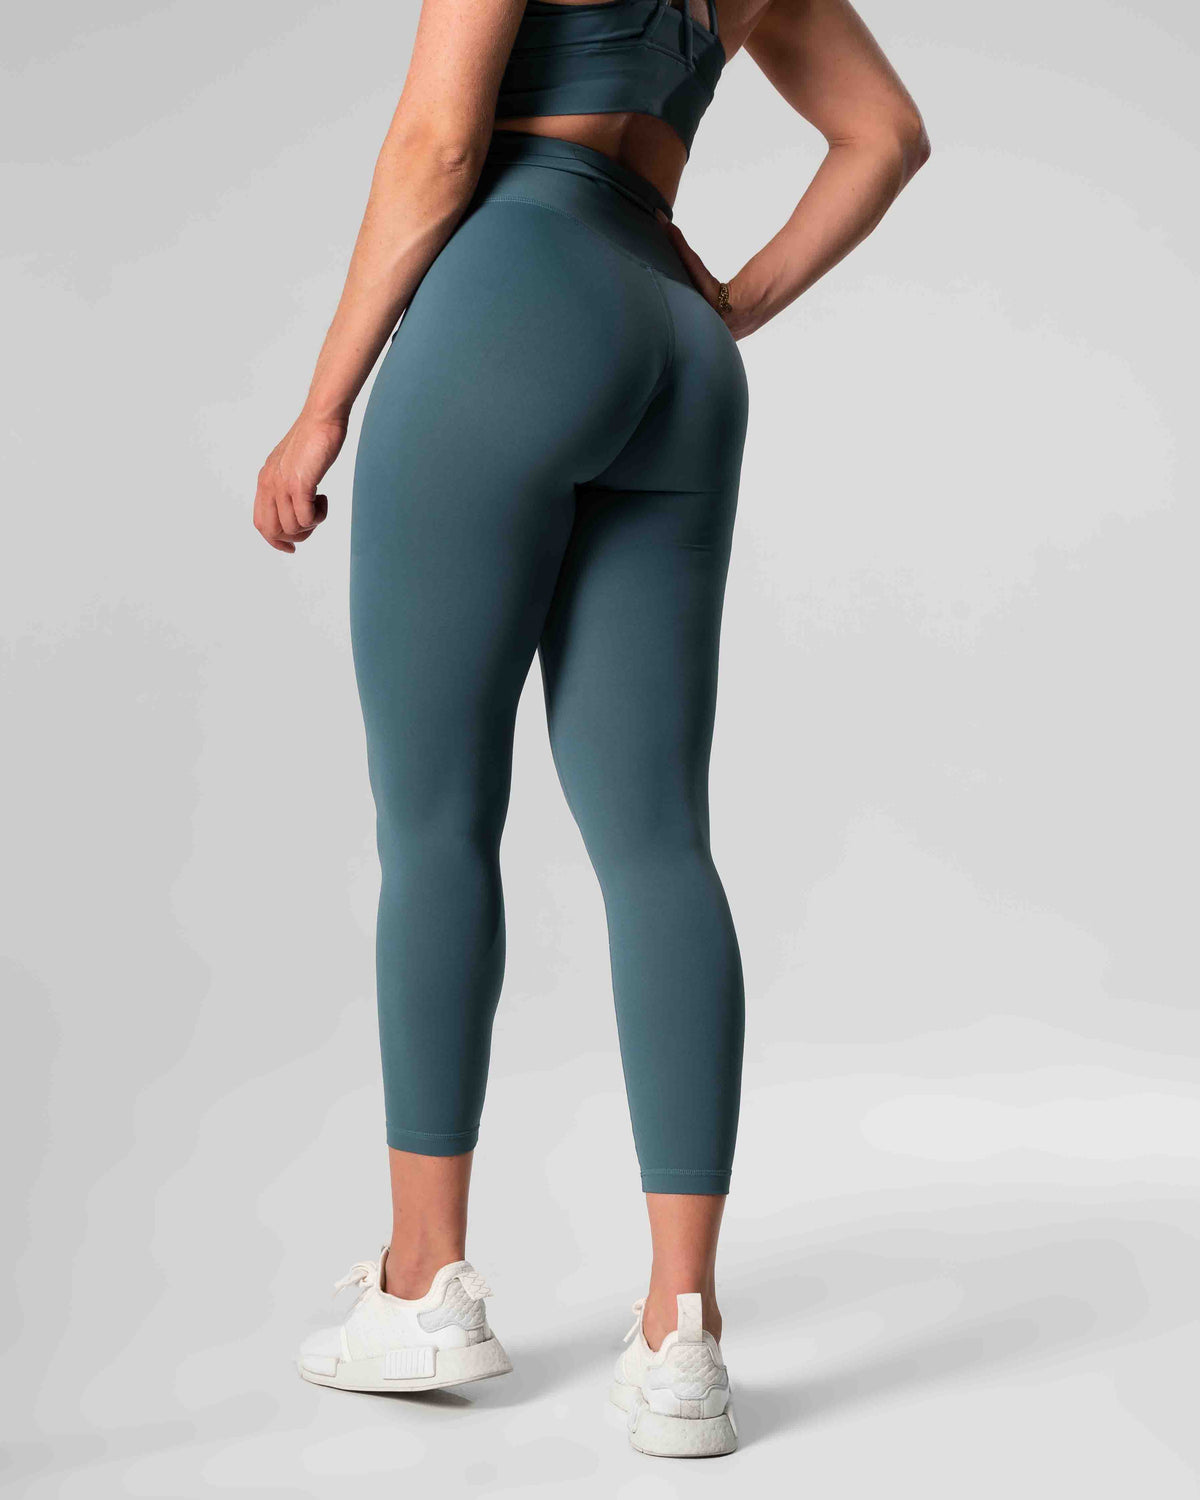 Workout clothes  Mercy collection - RELODE